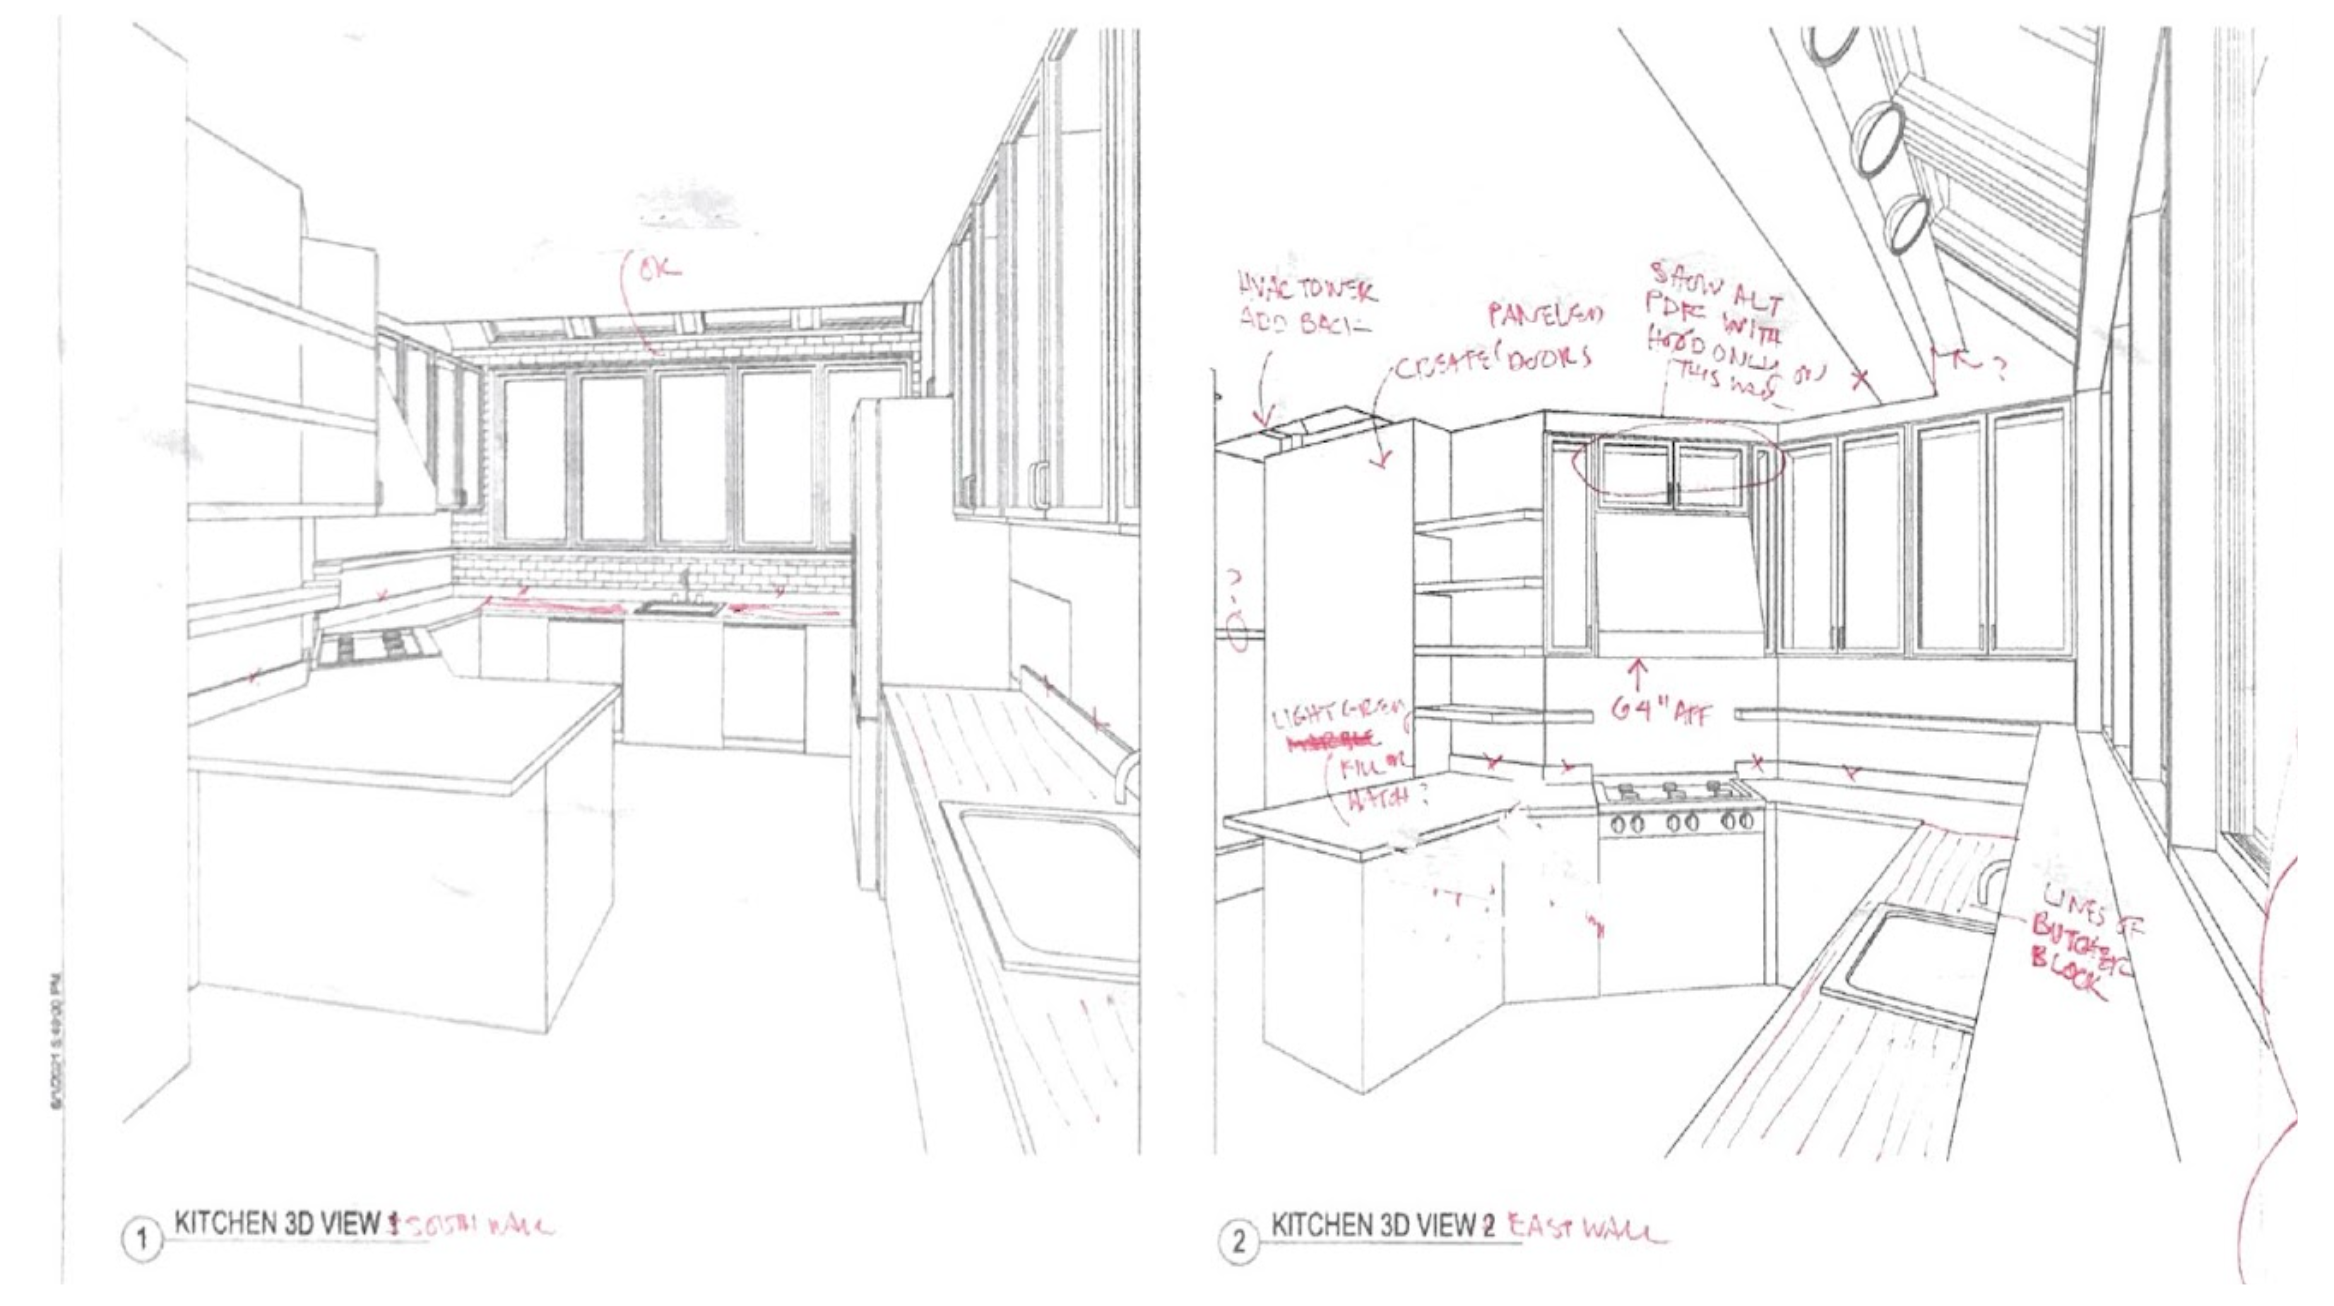 Two 3D sketches of a kitchen, from different points of view, with design notes